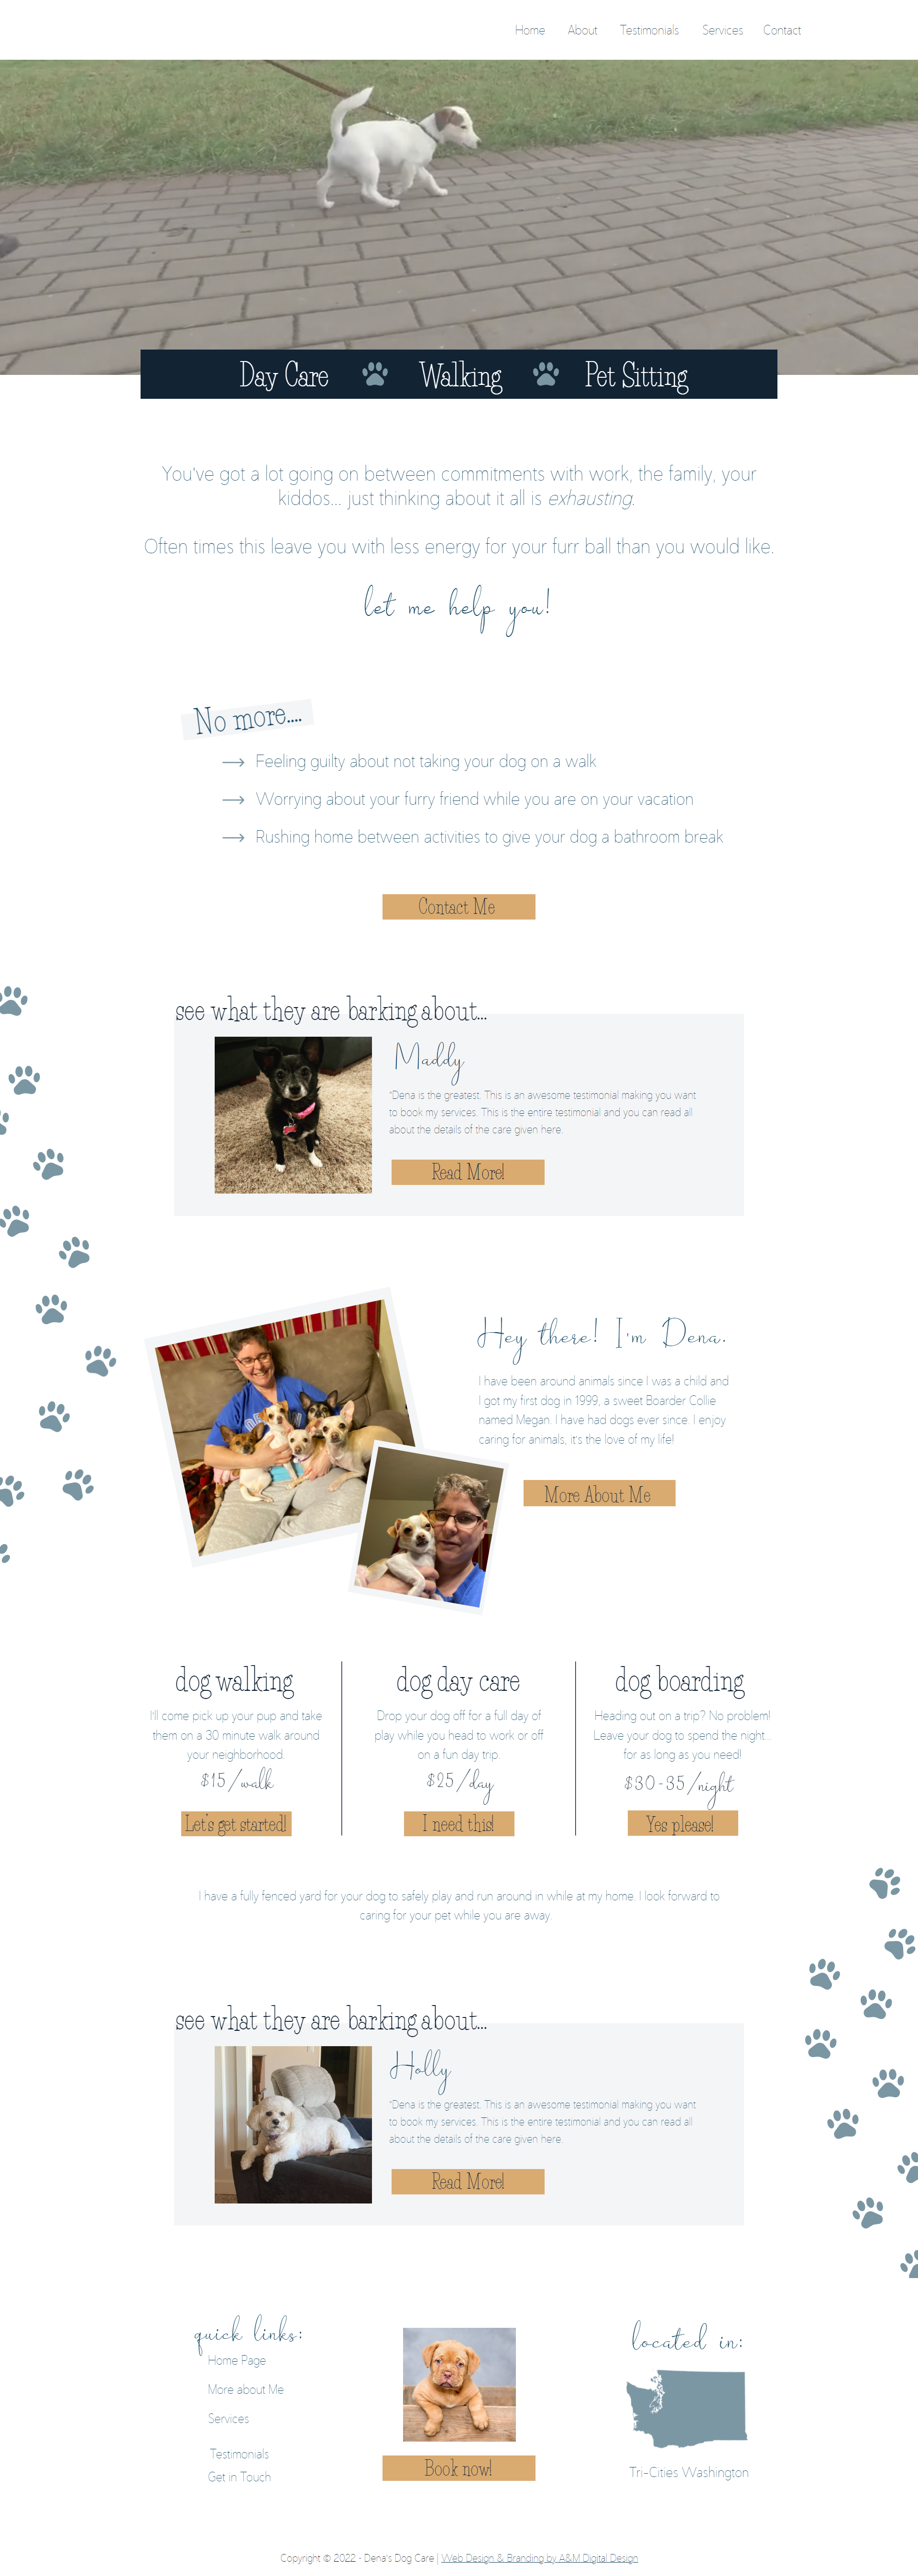 Services page for Dena's Dog Care